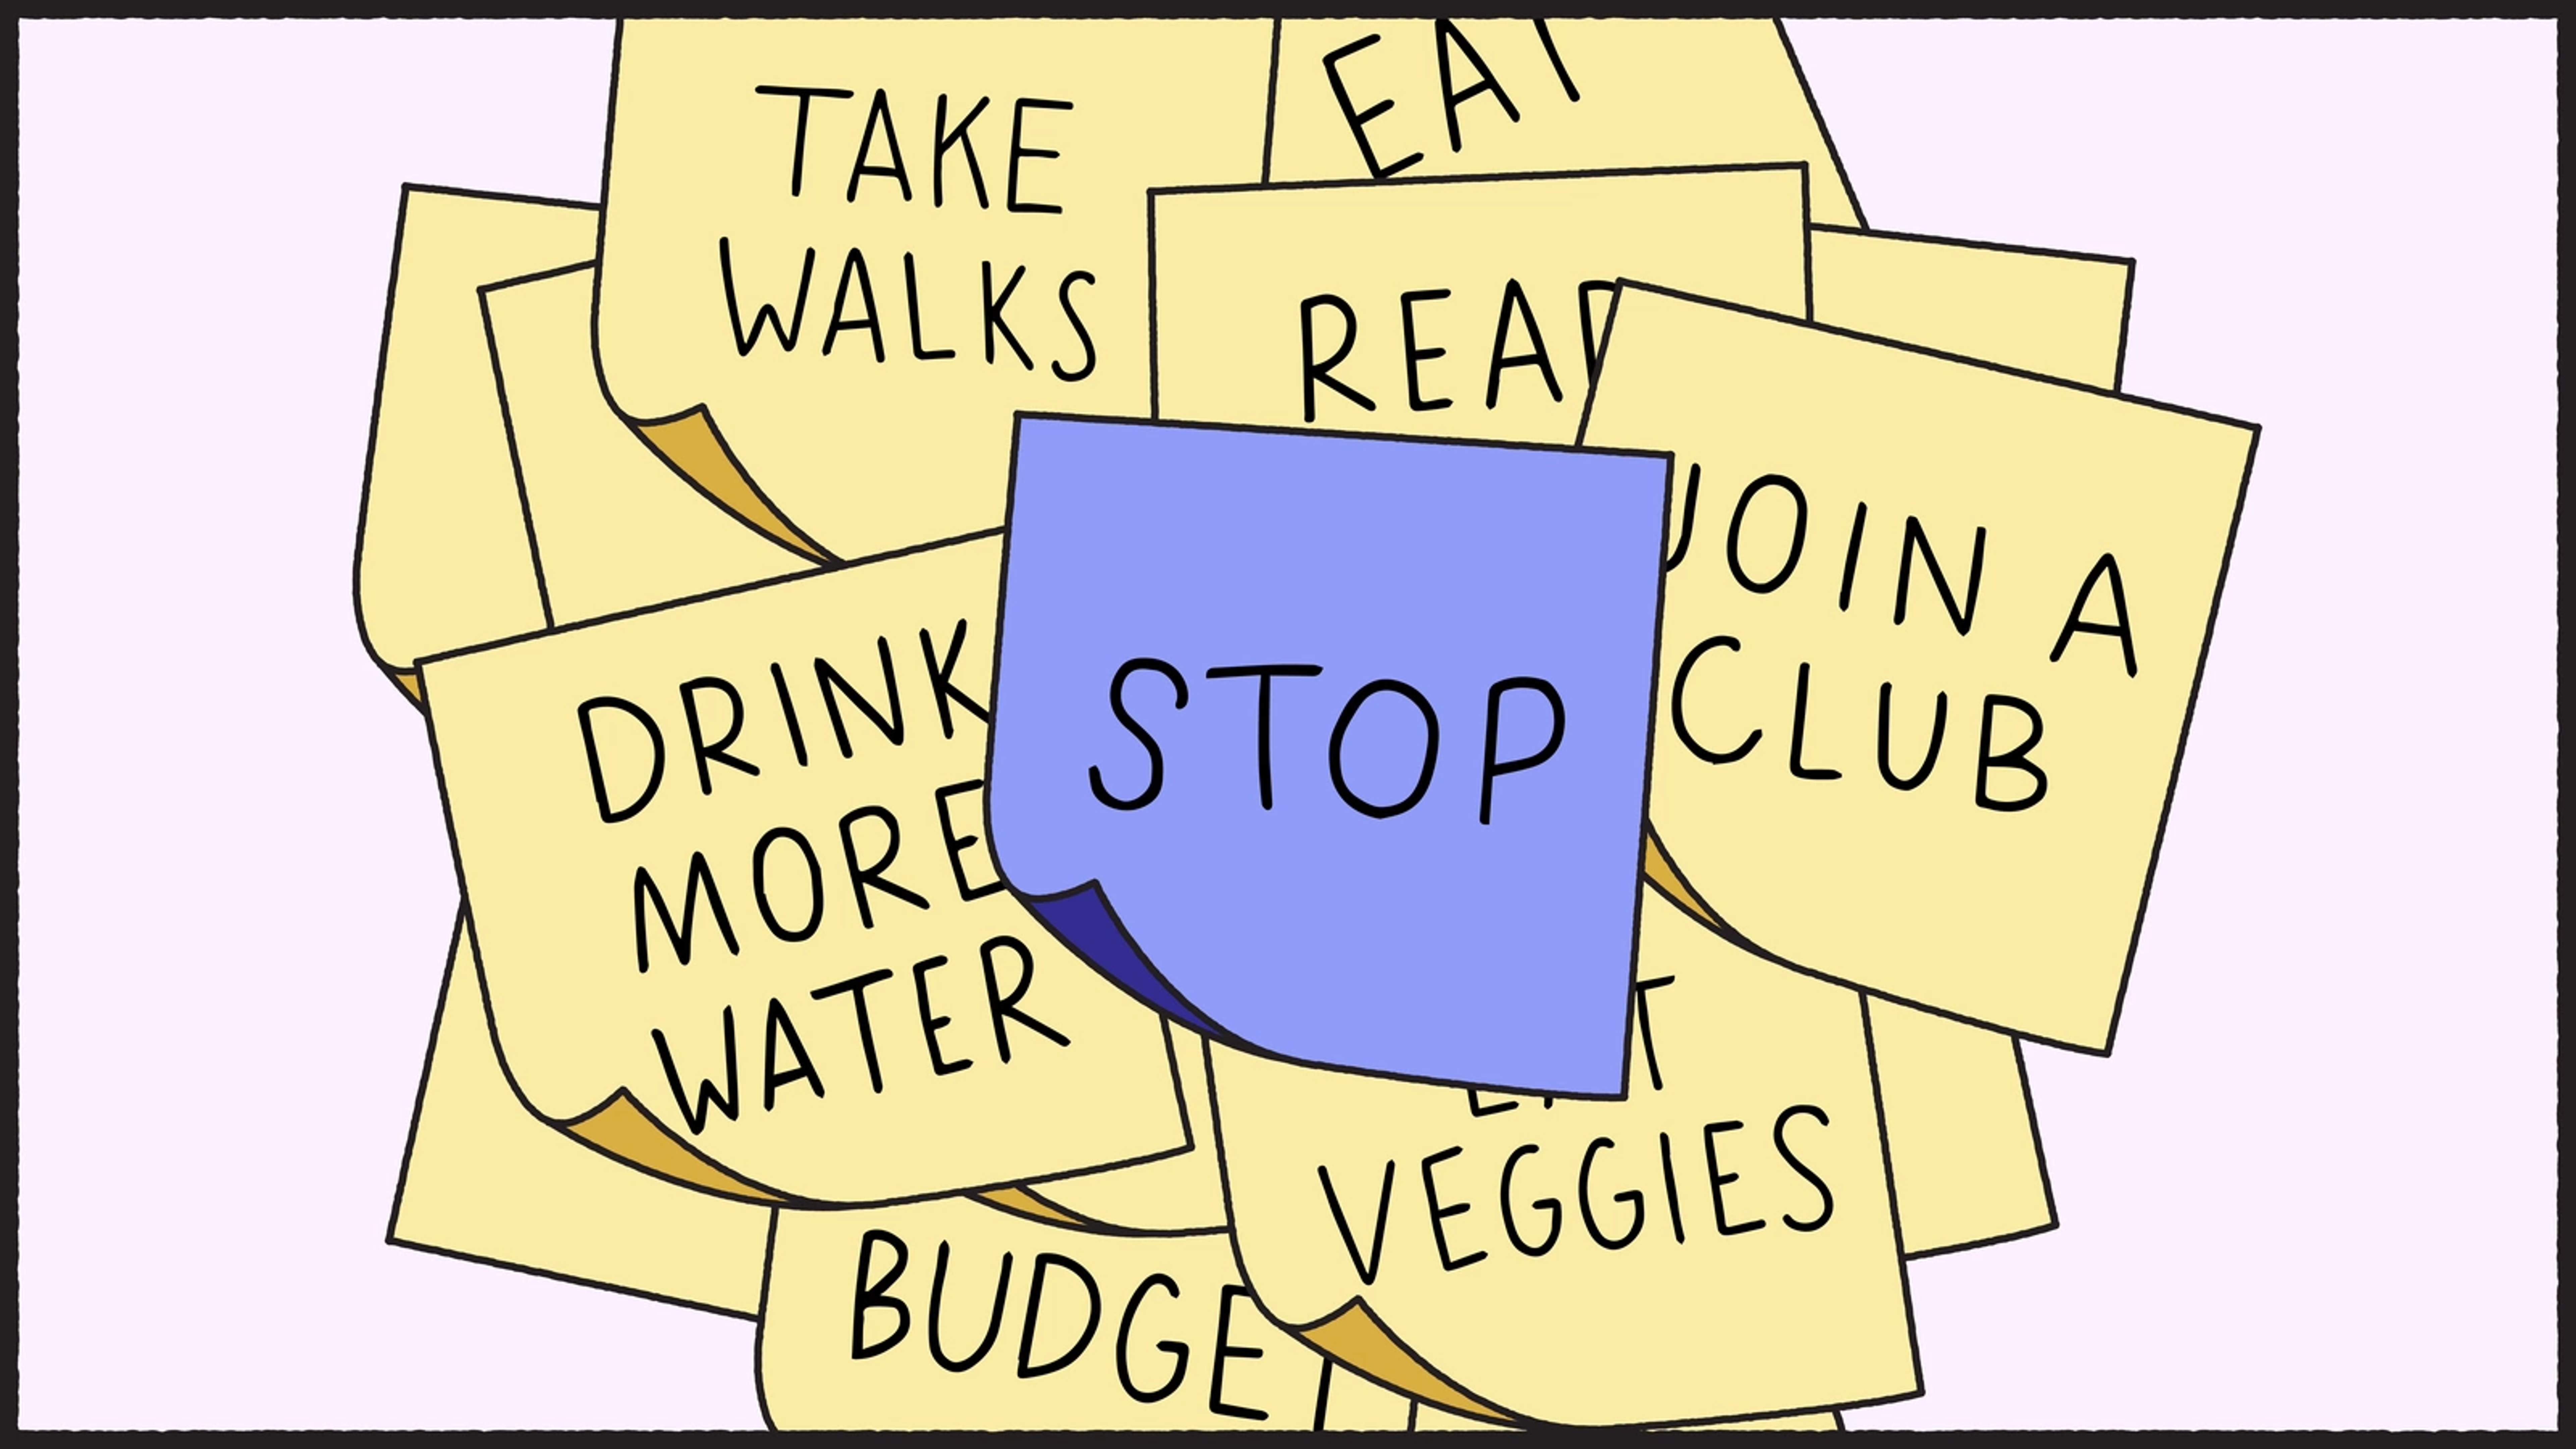 Illustration of New Year's resolutions on post-it notes, like take walks and drink more water, with a purple stop post-it note over the pile.